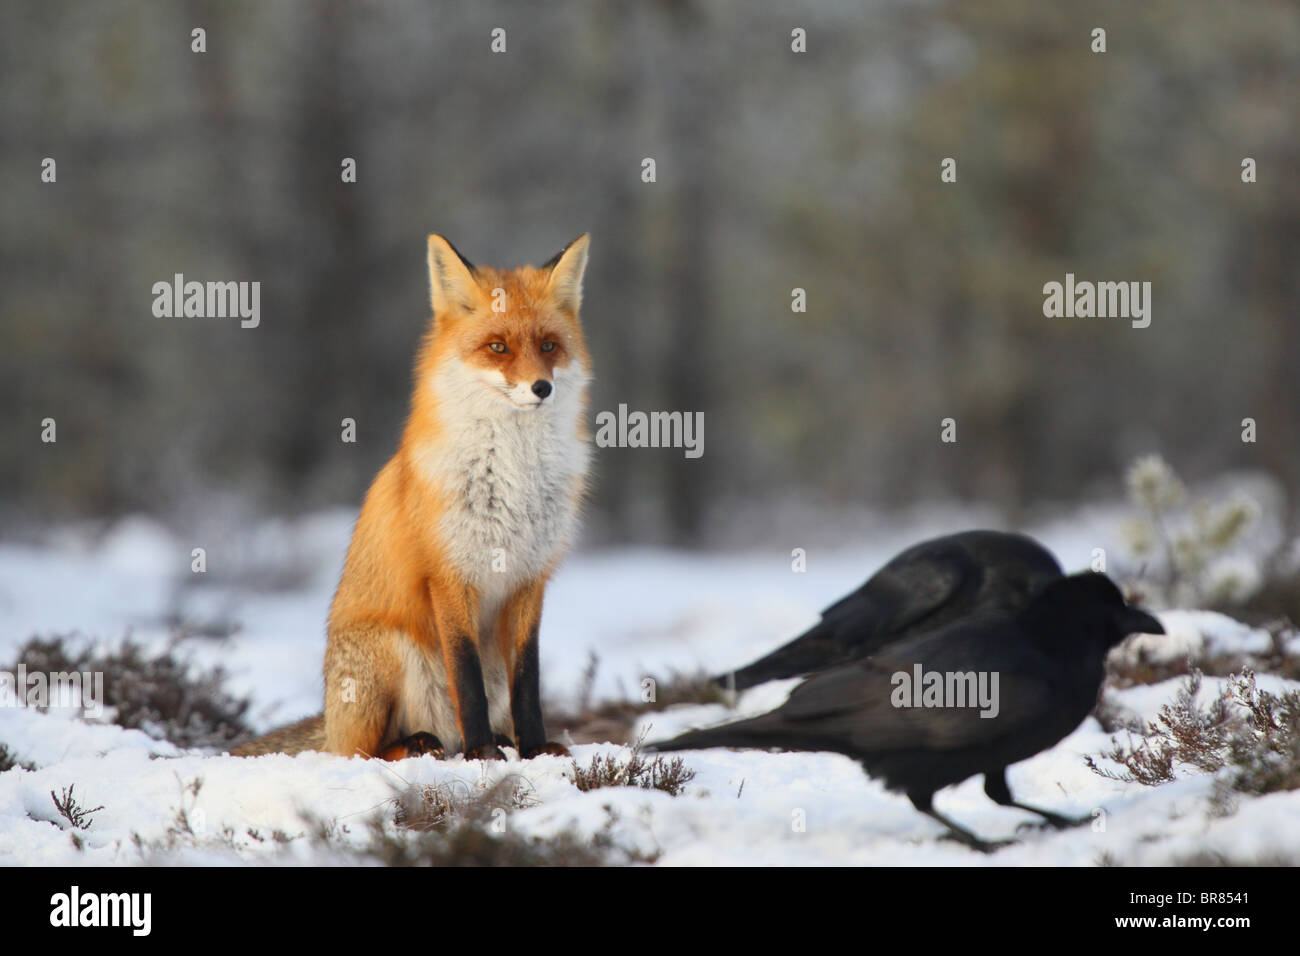 Wild Red Fox (Vulpes vulpes) sitting and looking at the ravens. Stock Photo